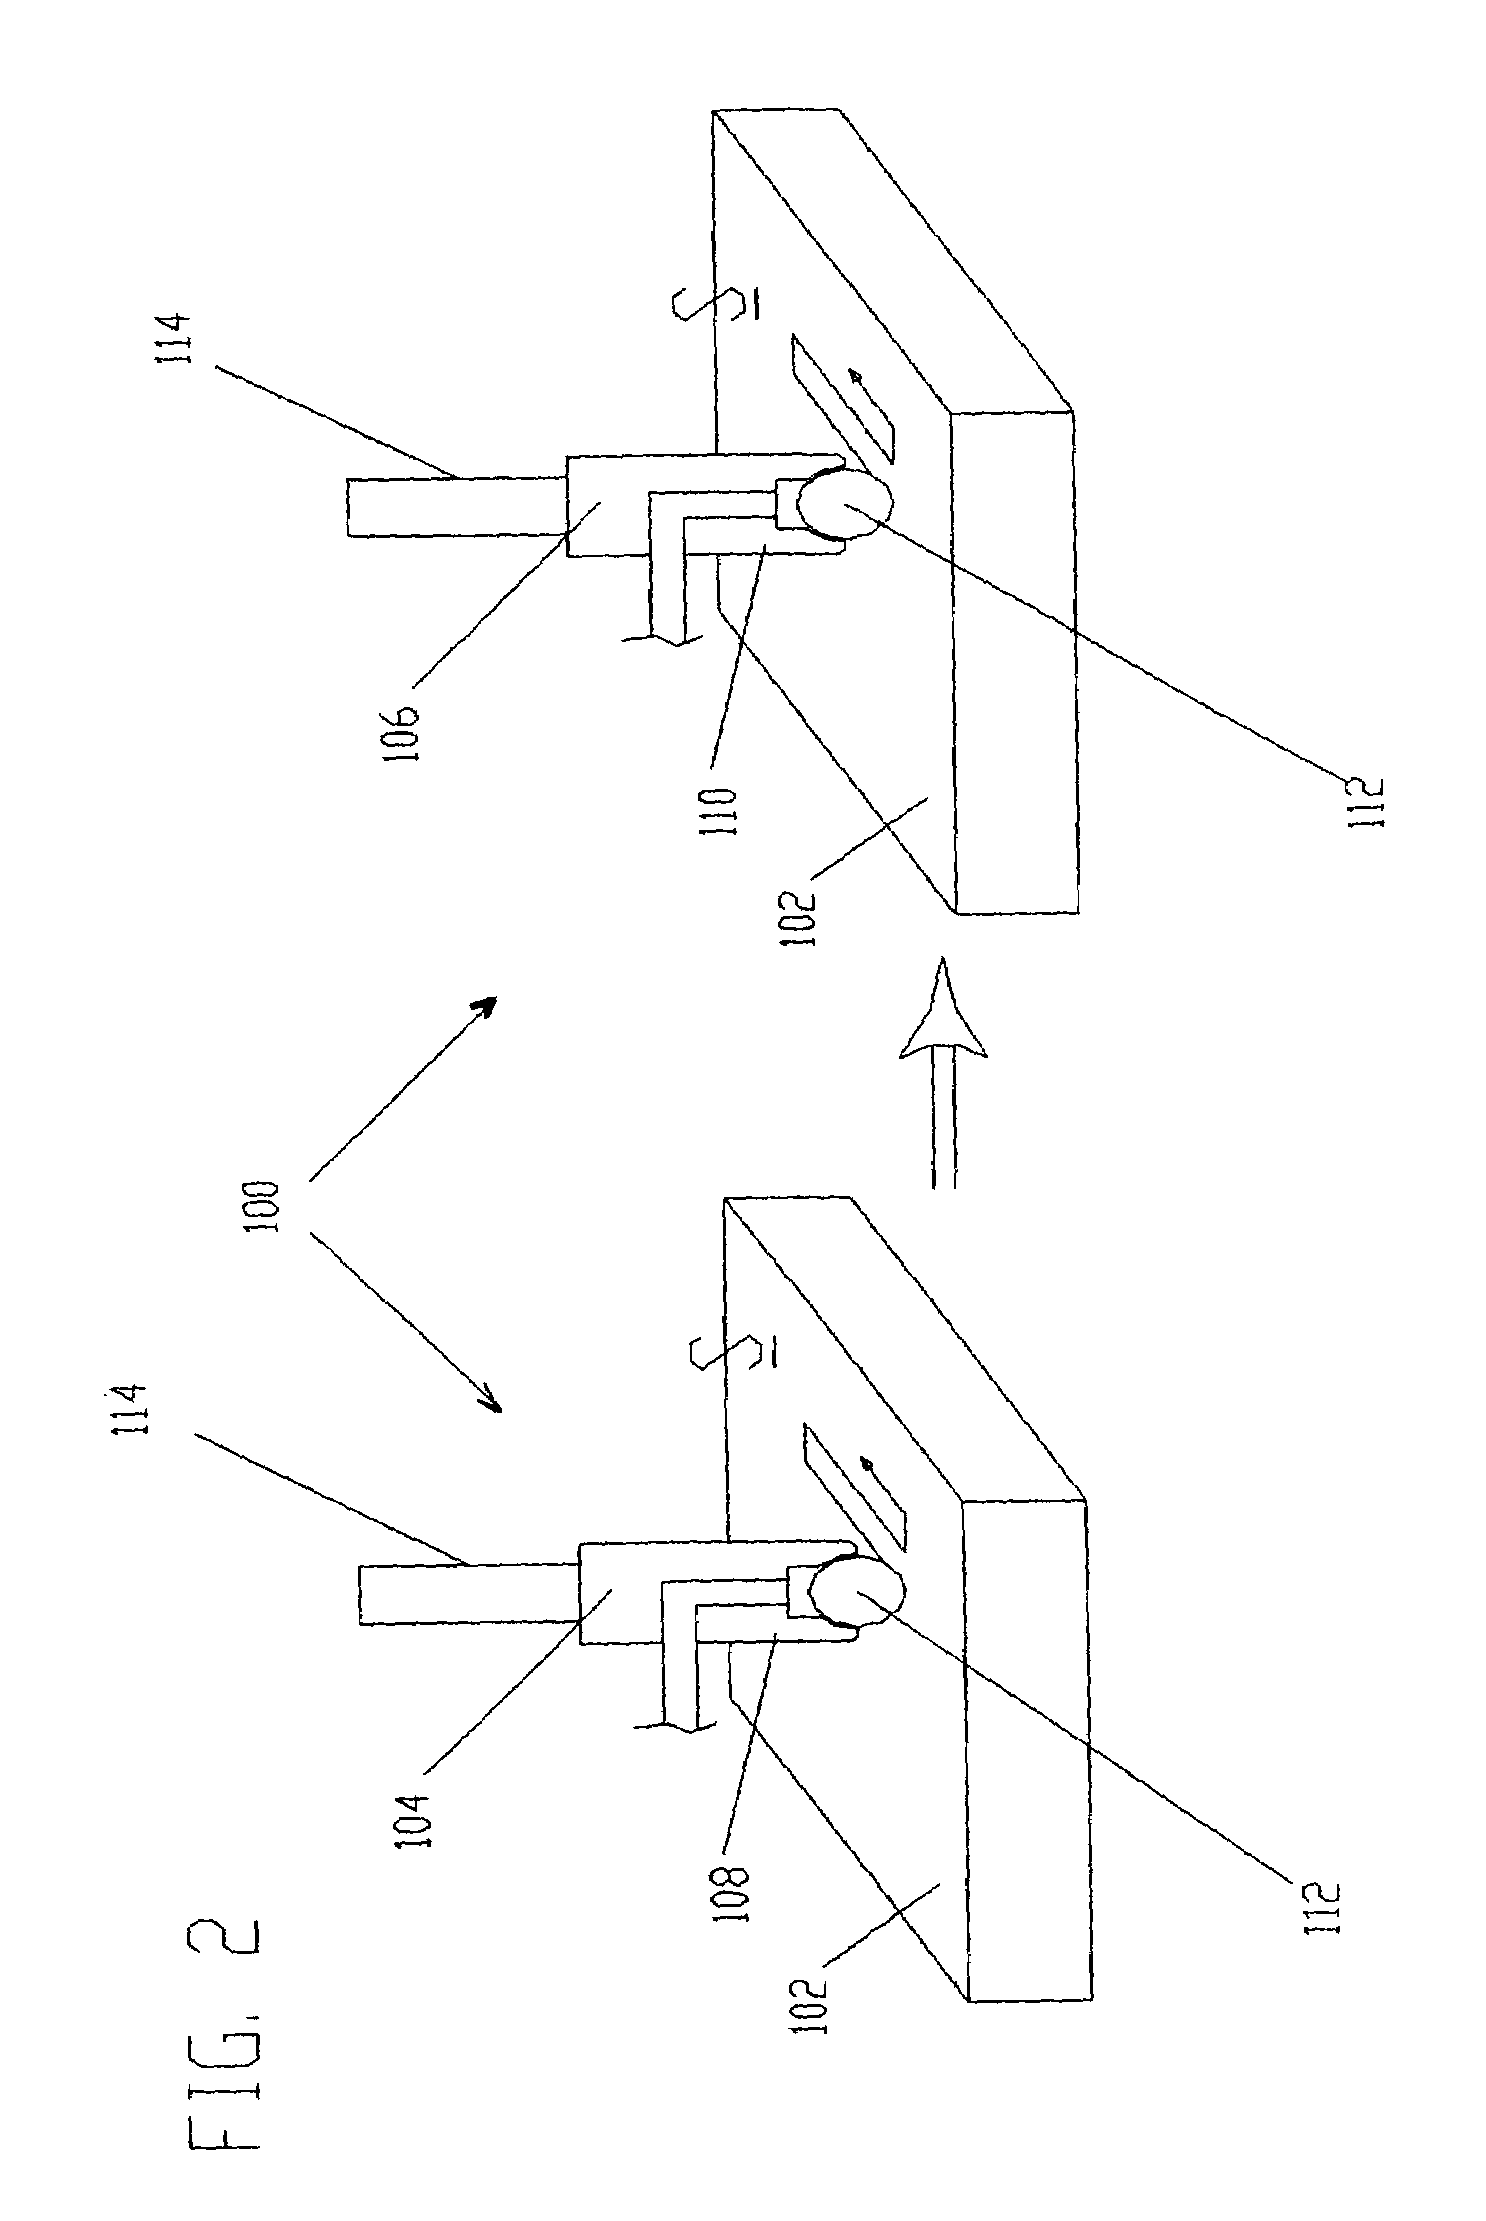 Method for improving the magnitude of compressive stress developed in the surface of a part